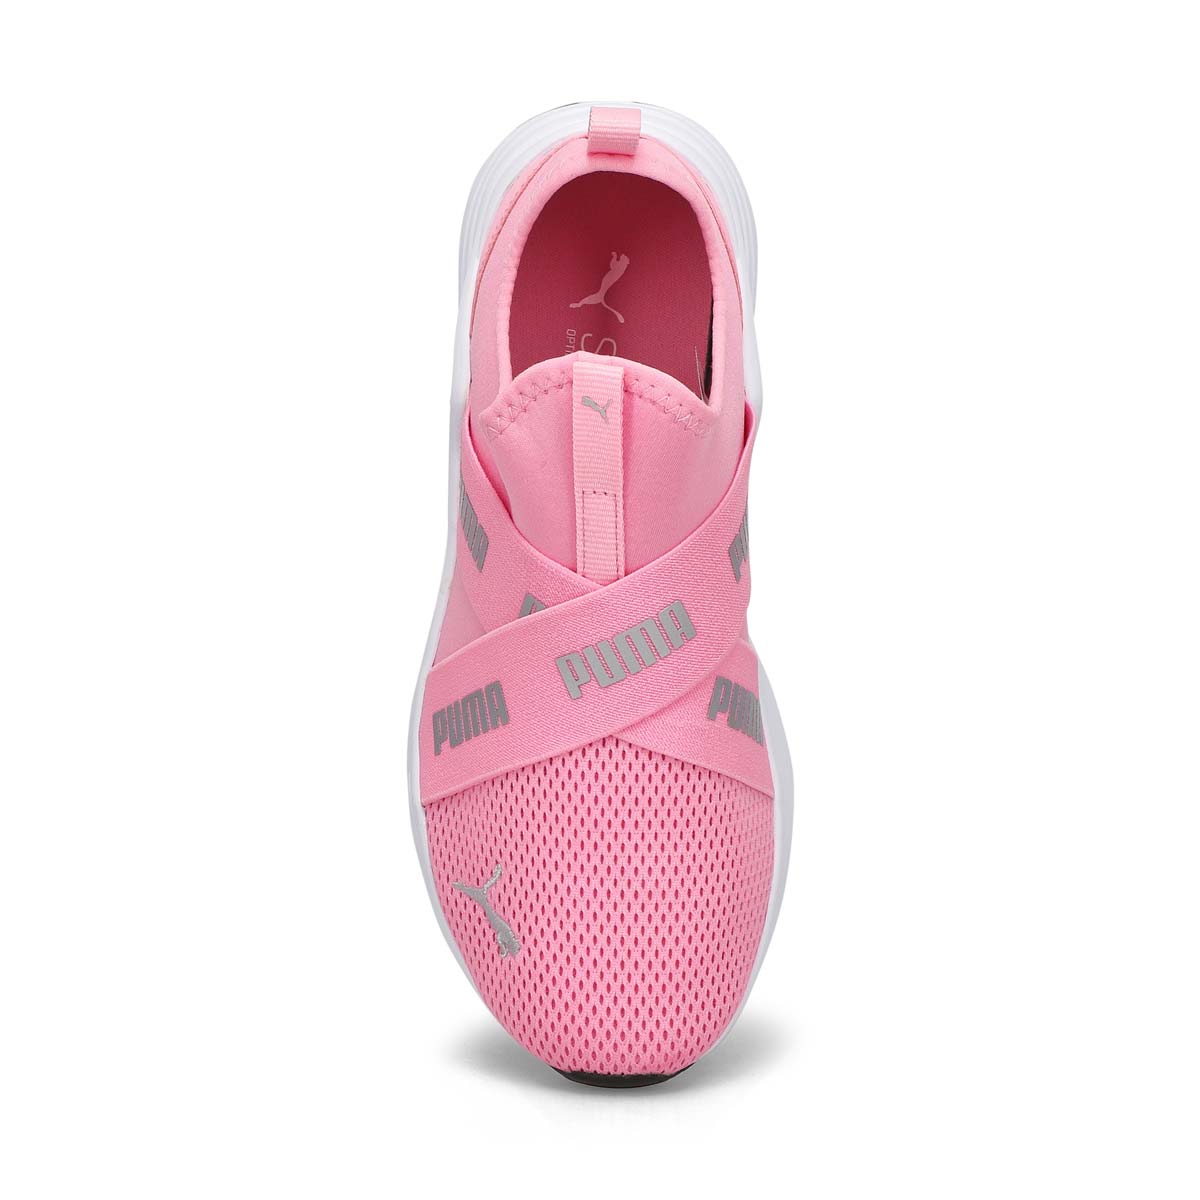 Girl's Puma Wired Slip On Sneaker - Pink/Silver